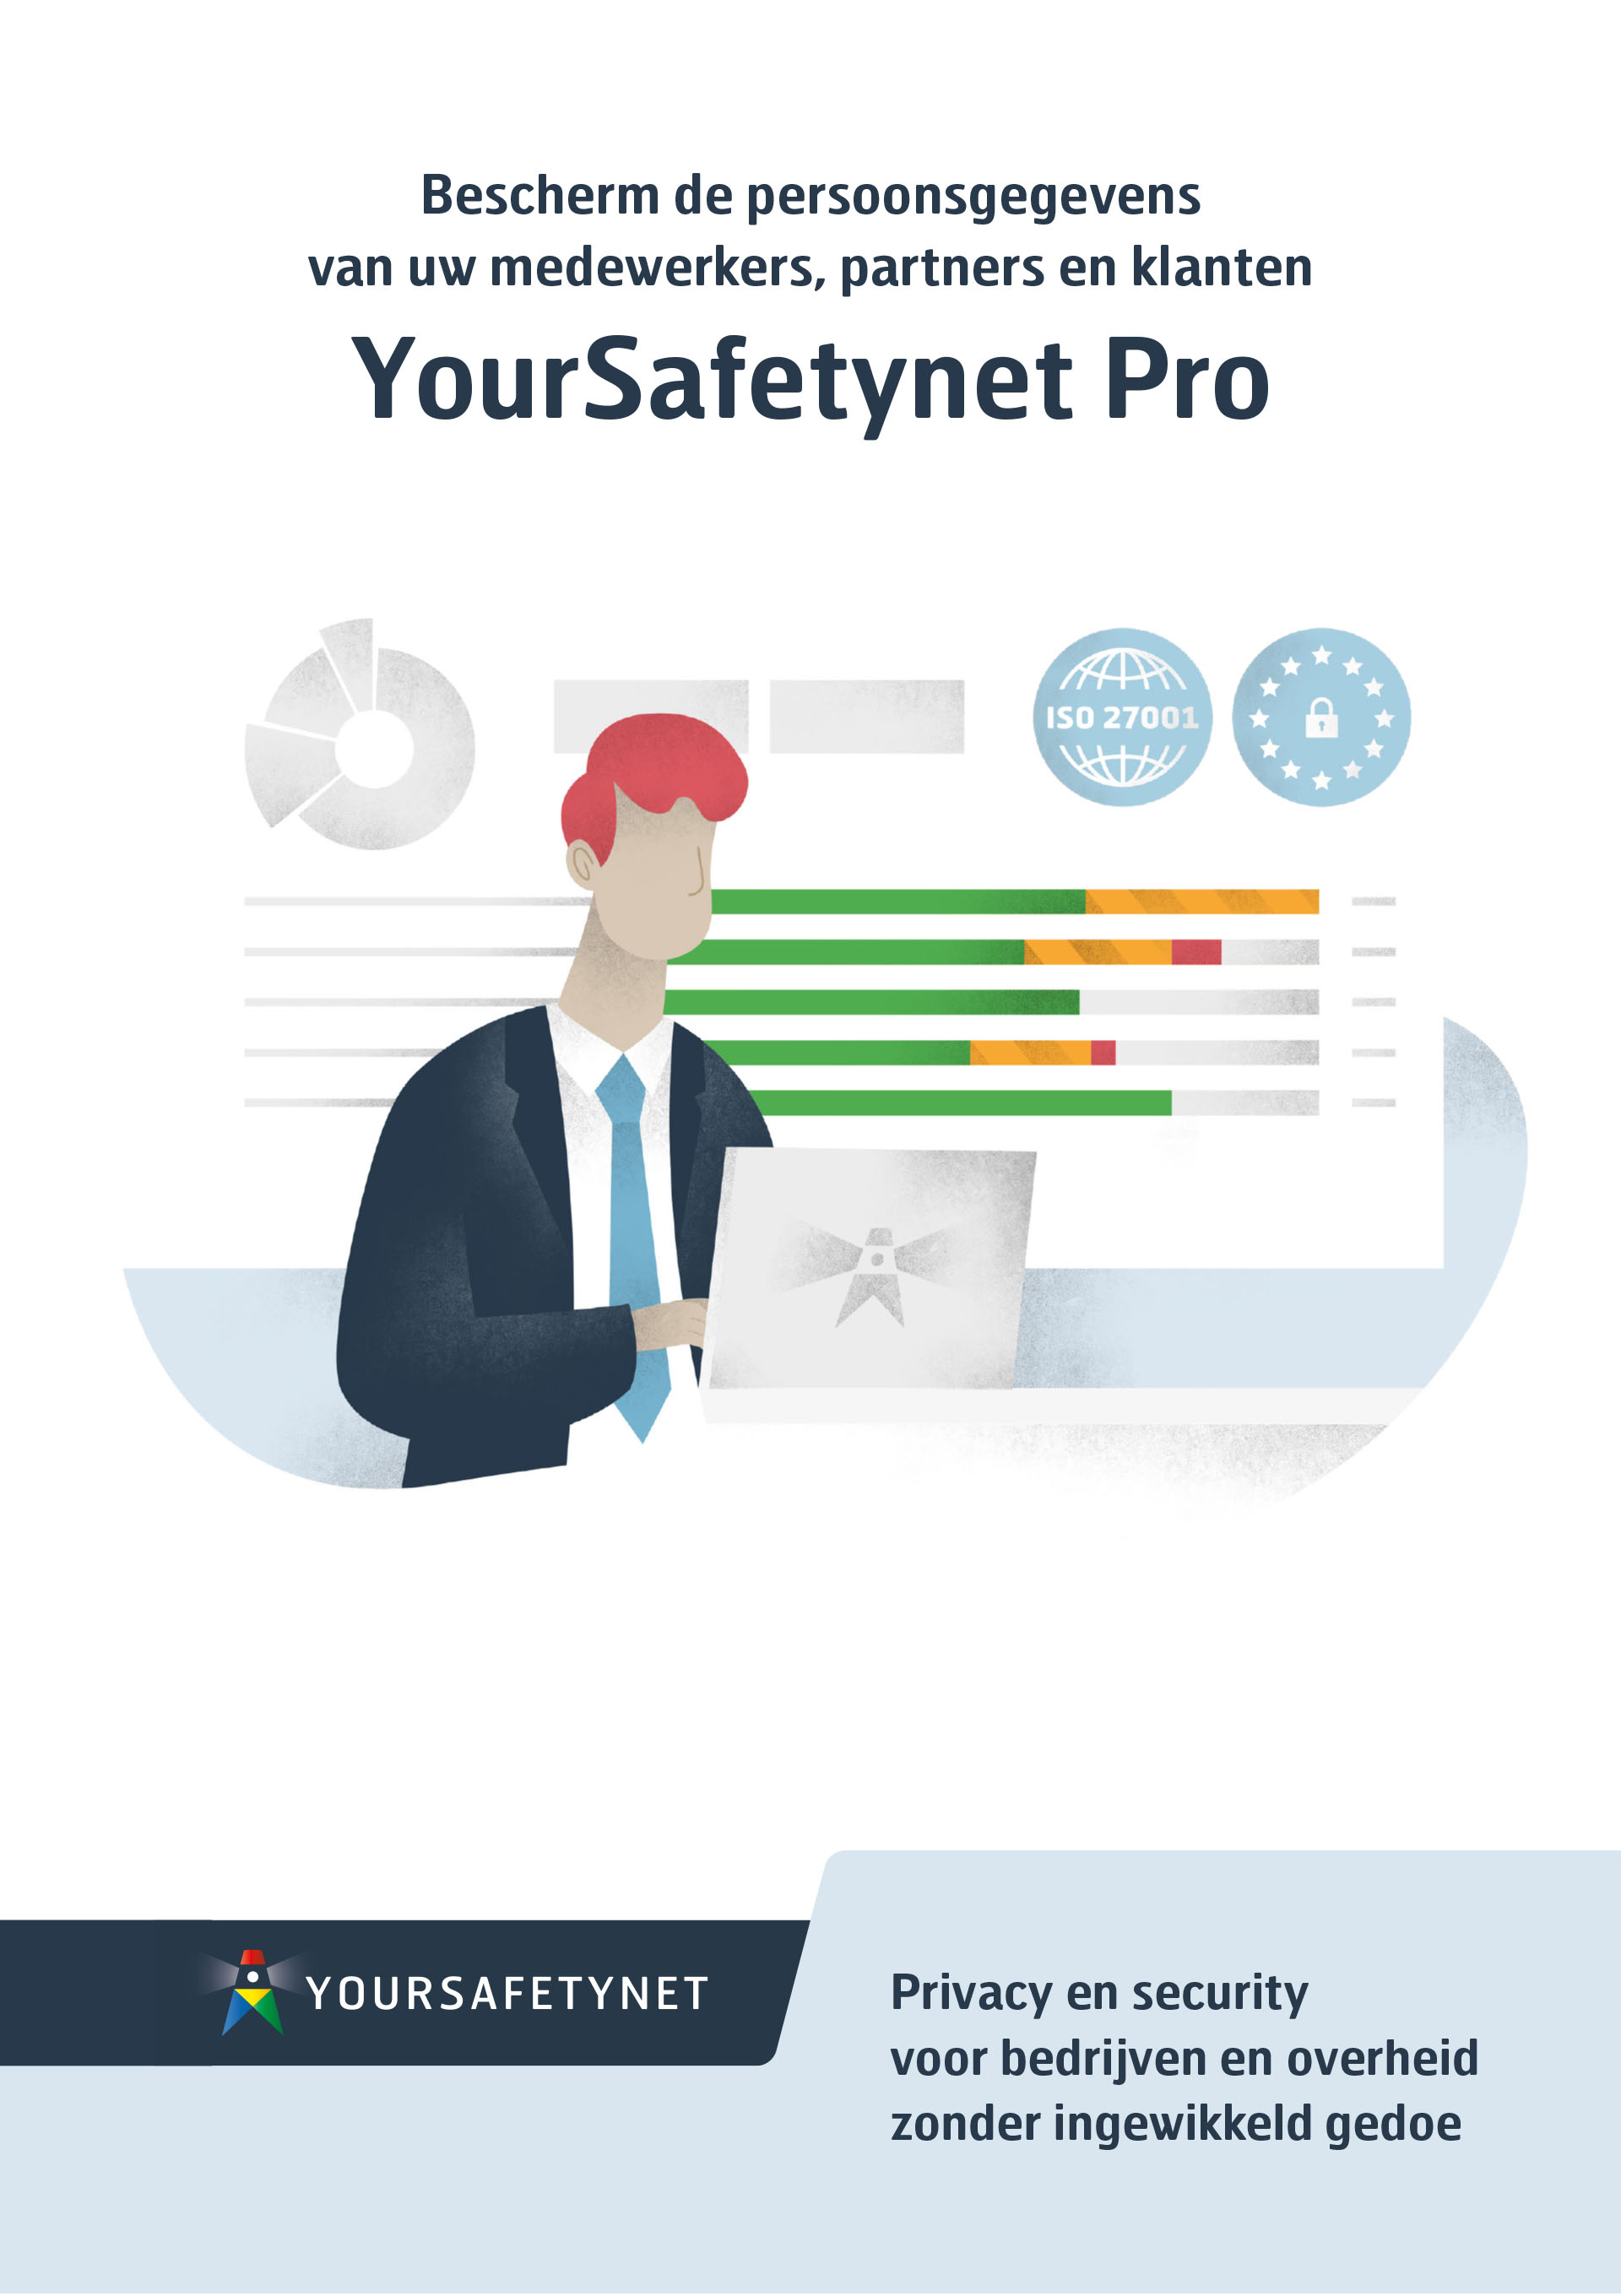 YourSafetynet Pro